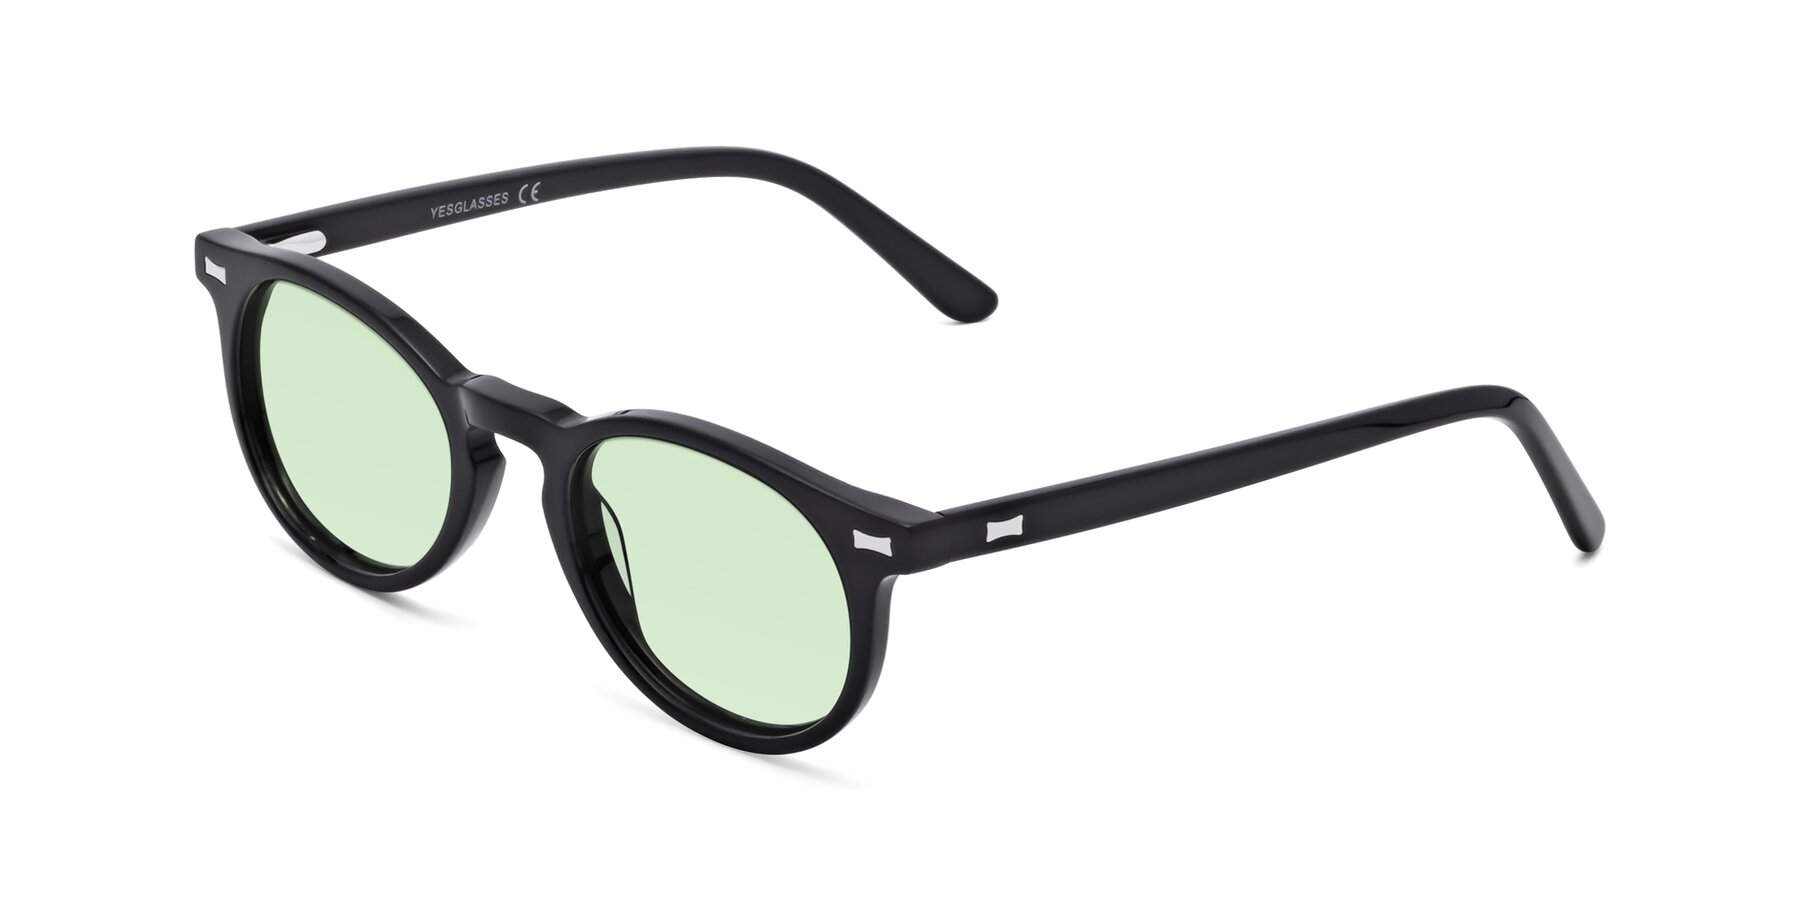 Angle of 17330 in Black with Light Green Tinted Lenses